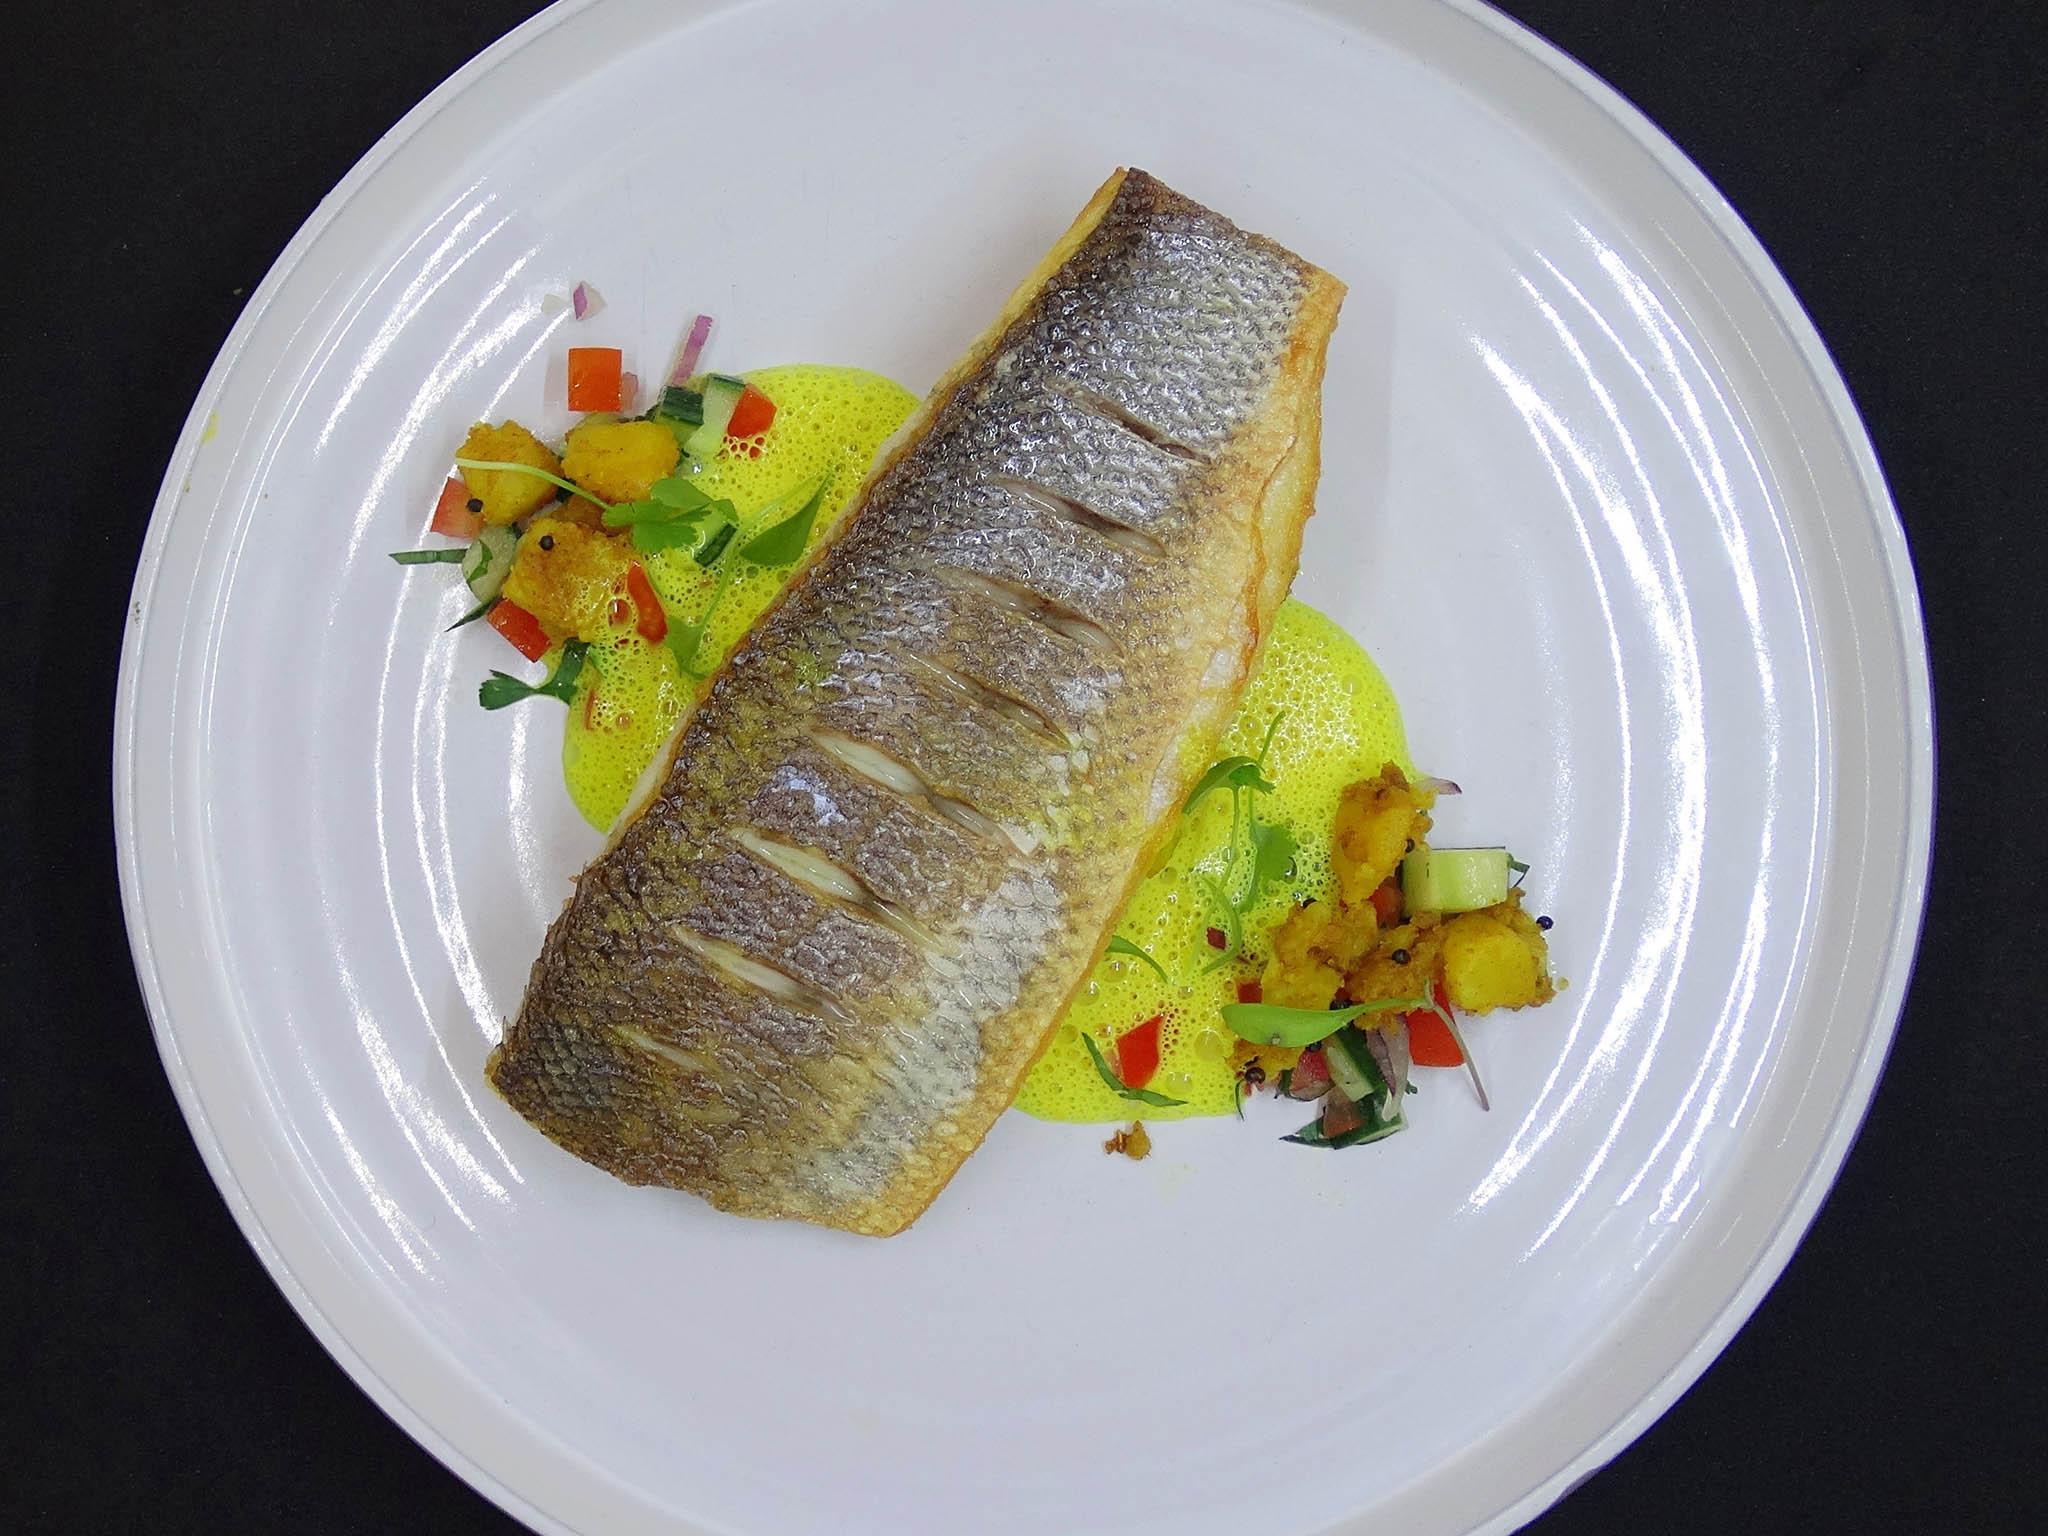 The sea bass is the star of the show with Bombay aloo and tumeric foam